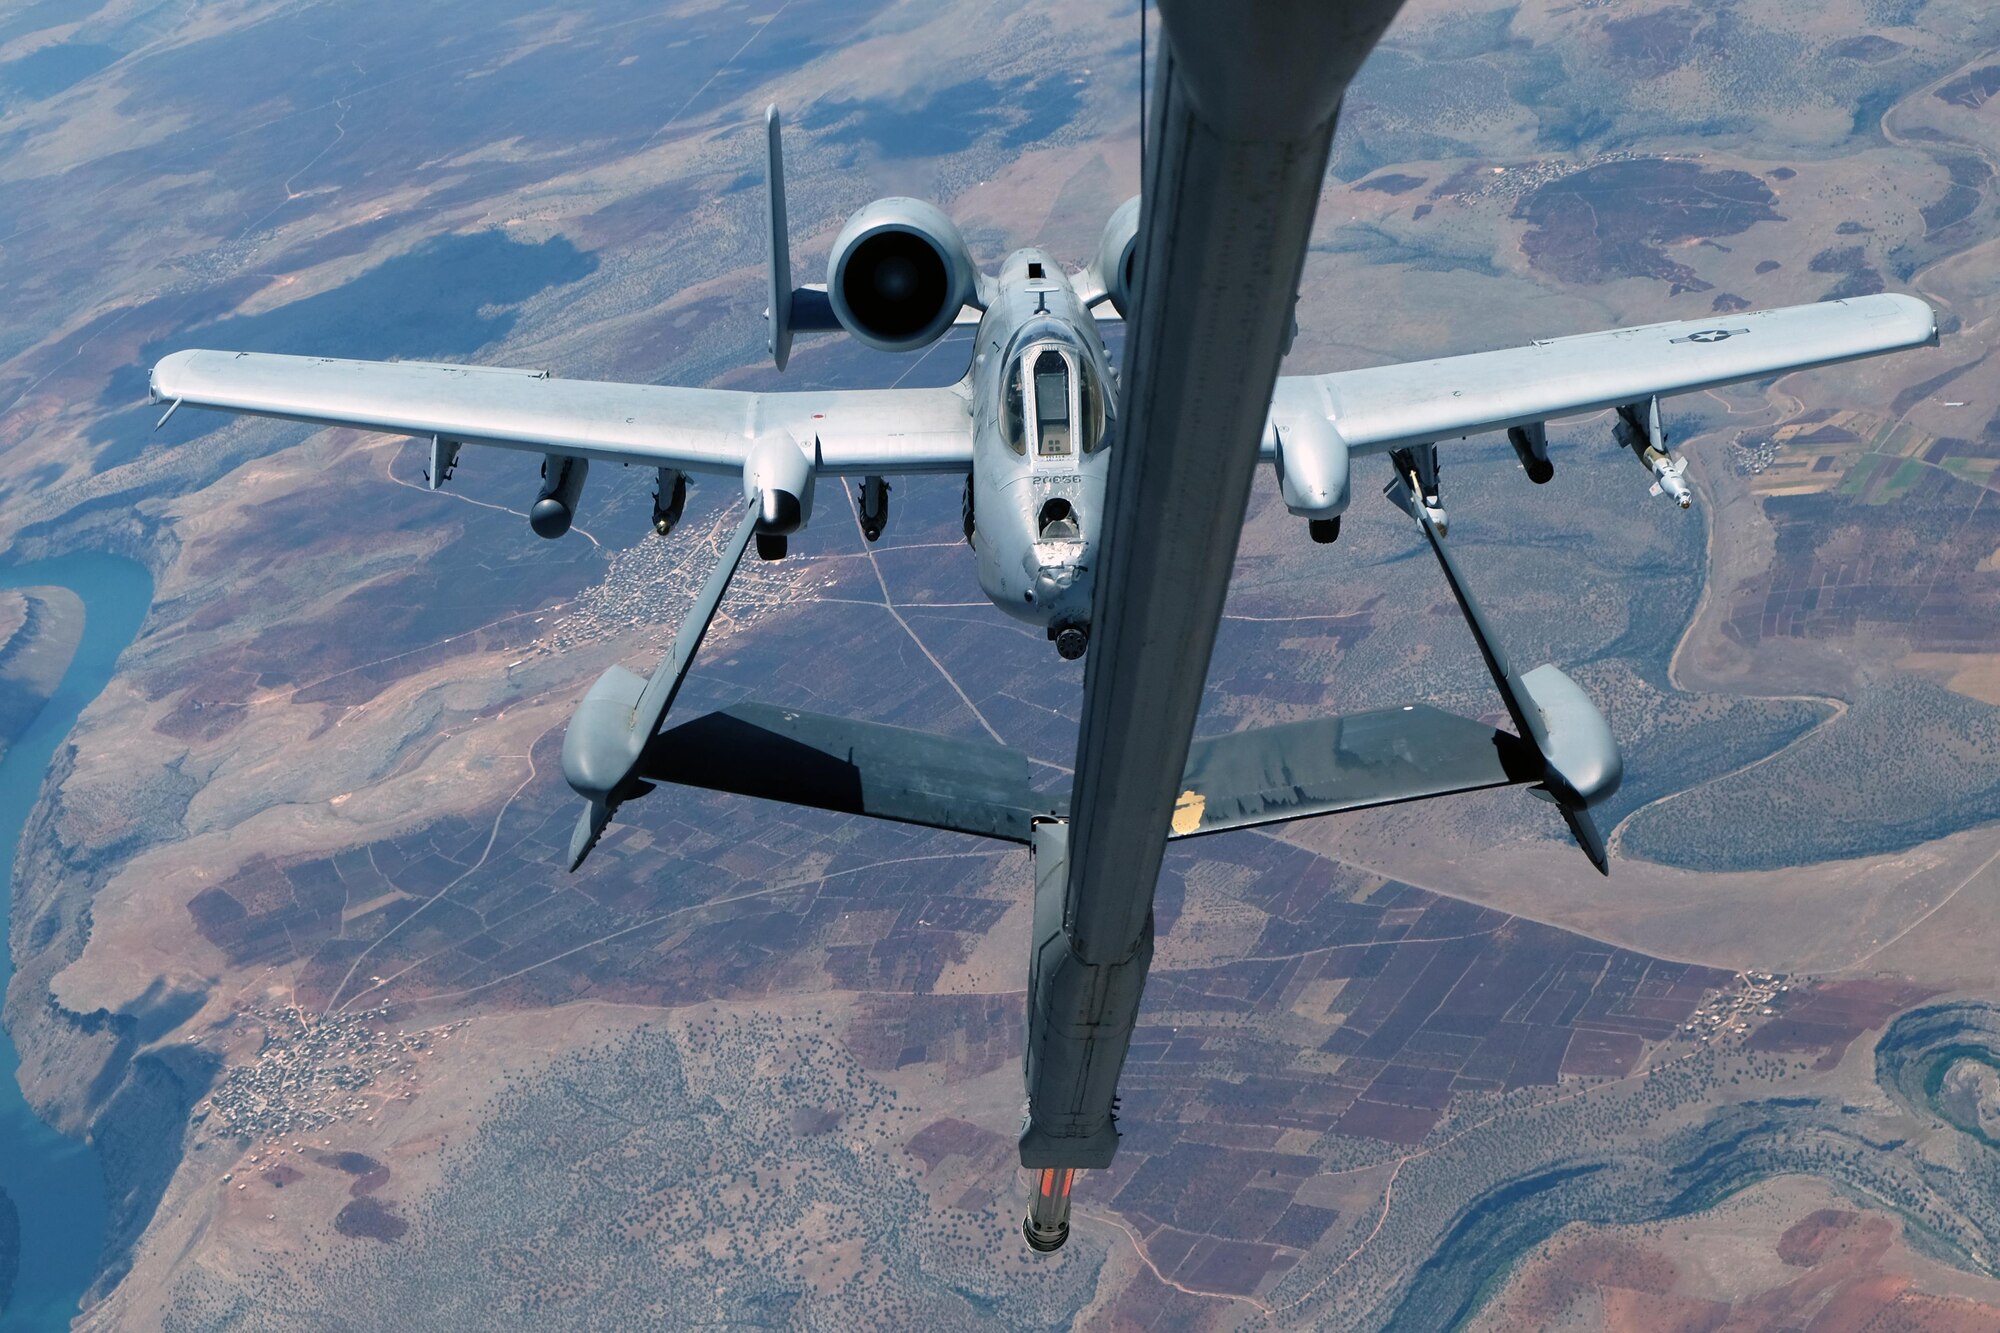 An A-10 Thunderbolt II prepares to receive fuel from a 908th Expeditionary Air Refueling Squadron KC-10 Extender May 31, 2017, over an undisclosed location in southwest Asia. The Thunderbolt II can employ a wide variety of conventional munitions and the GAU-8/A 30mm cannon, capable of firing 3,900 rounds per minute to defeat a wide variety of targets including tanks. (U.S. Air Force photo by Senior Airman Preston Webb)